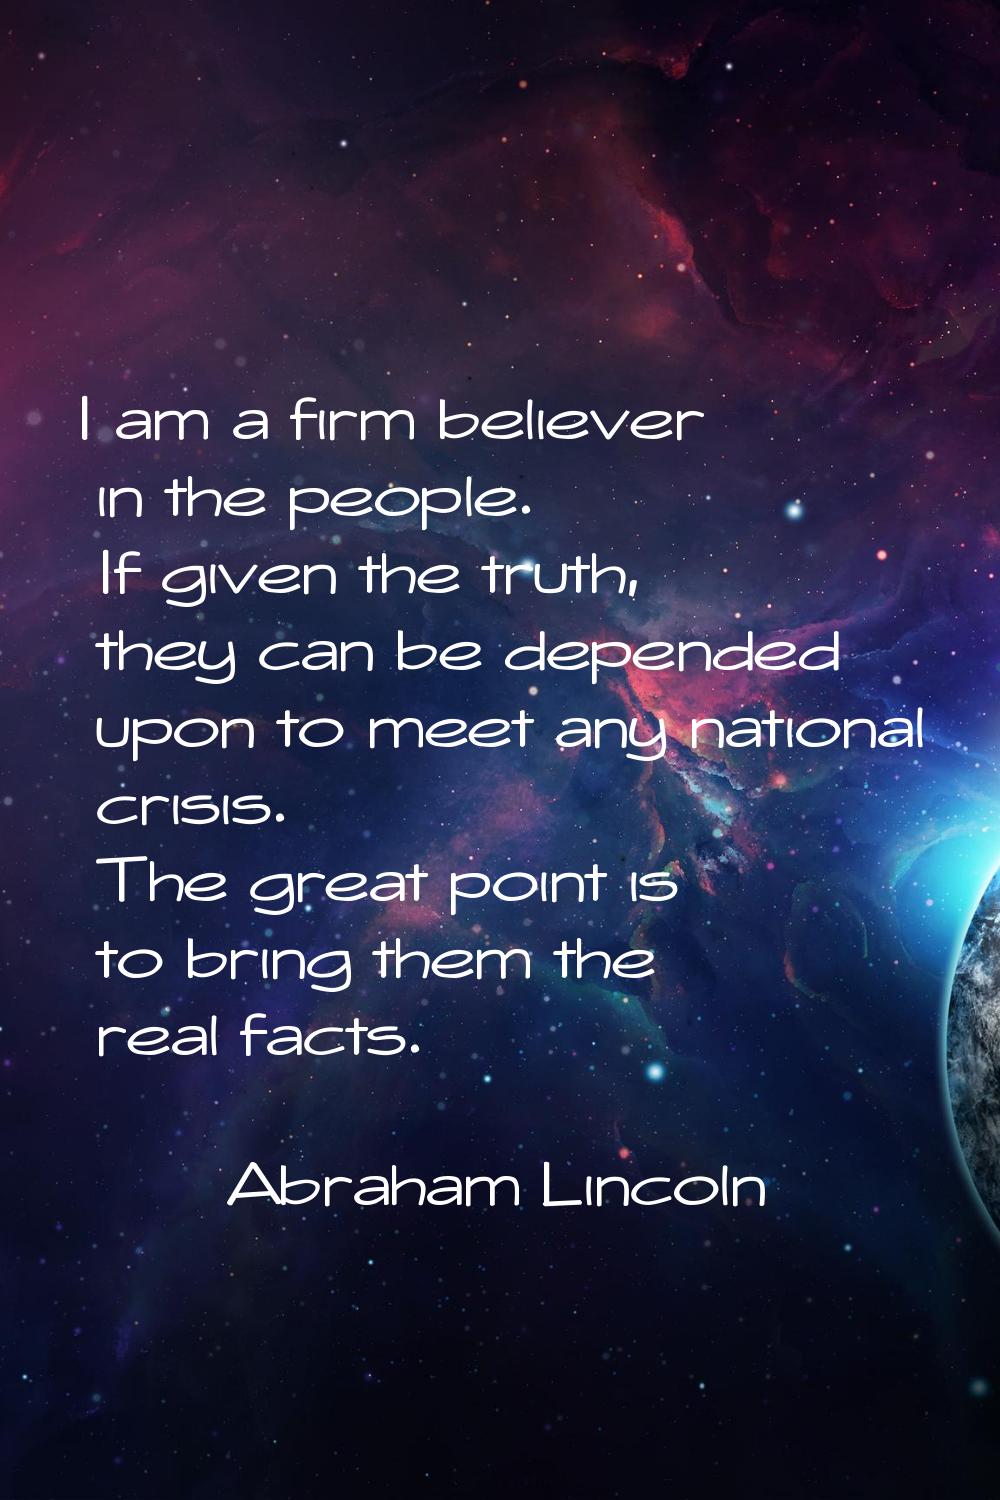 I am a firm believer in the people. If given the truth, they can be depended upon to meet any natio